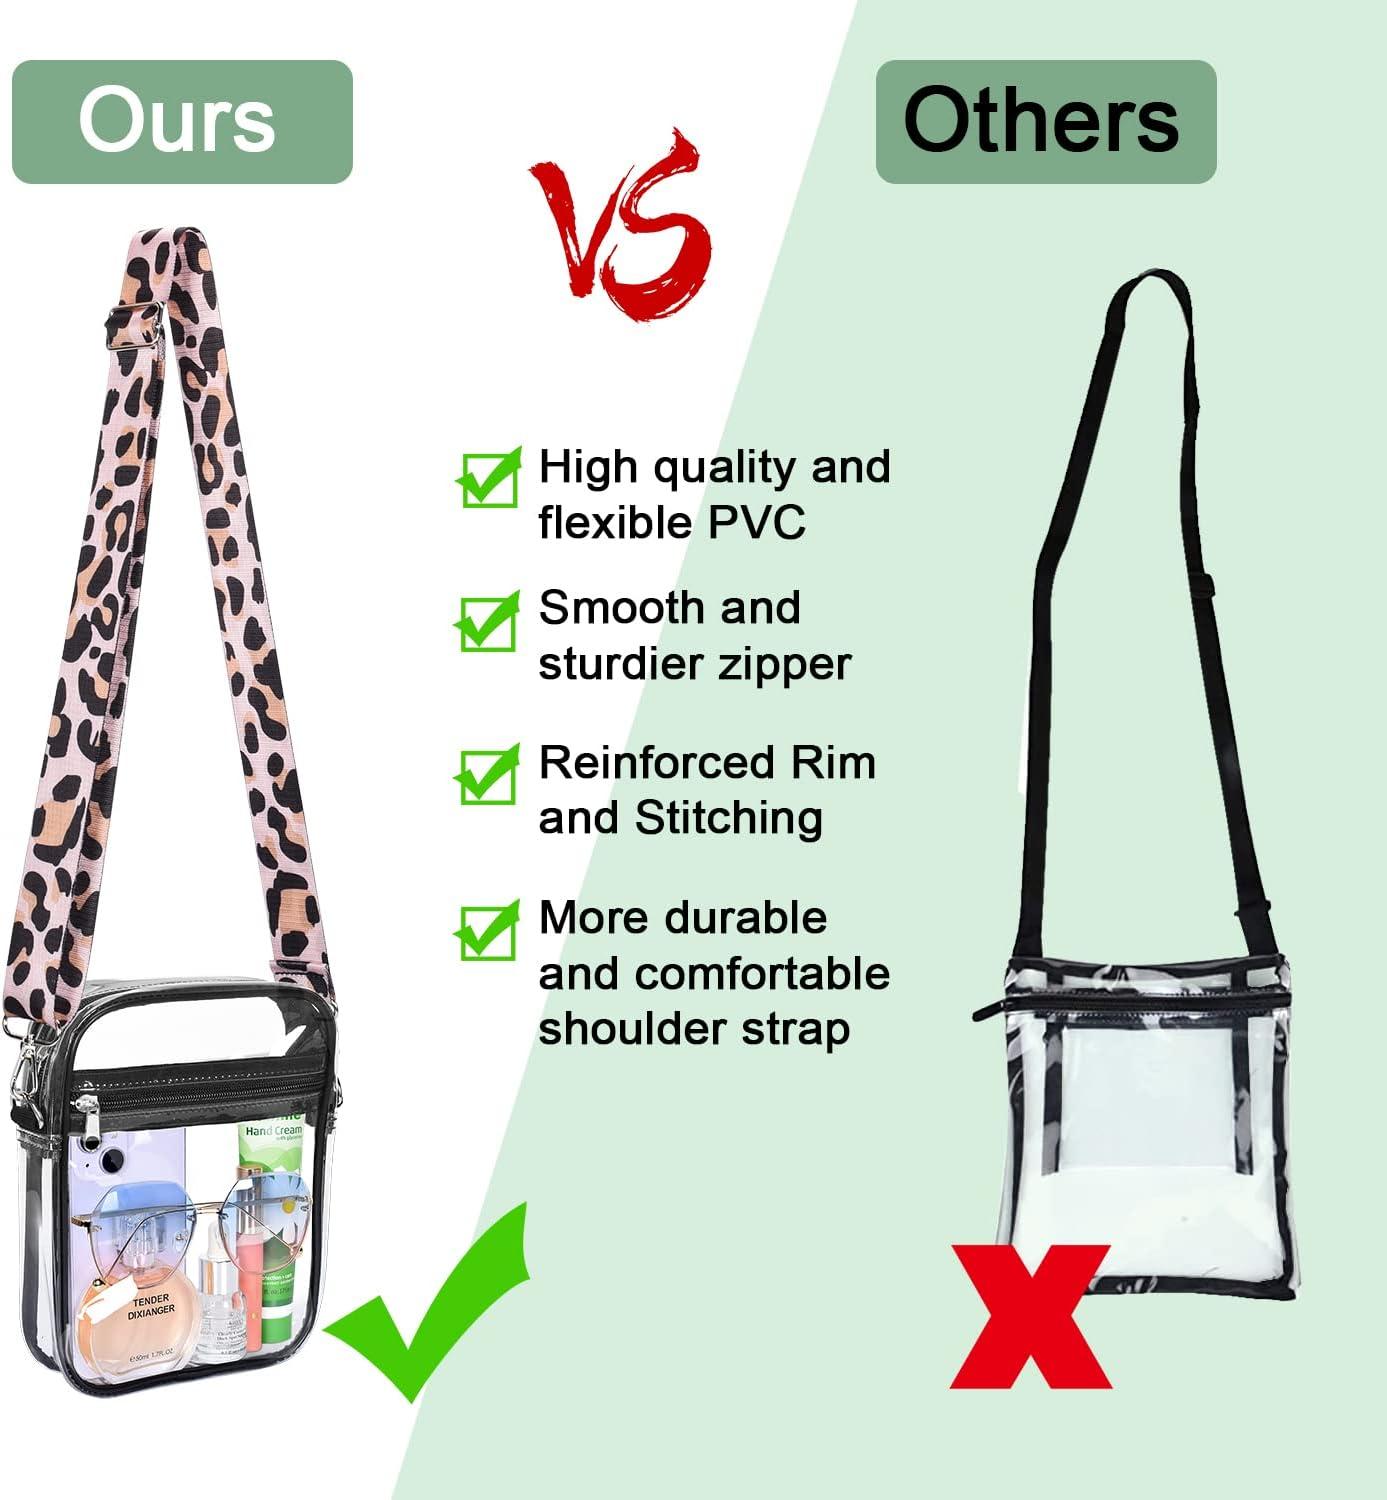 Clear Purses for Women Clear Crossbody Bags PVC Transparent Tote